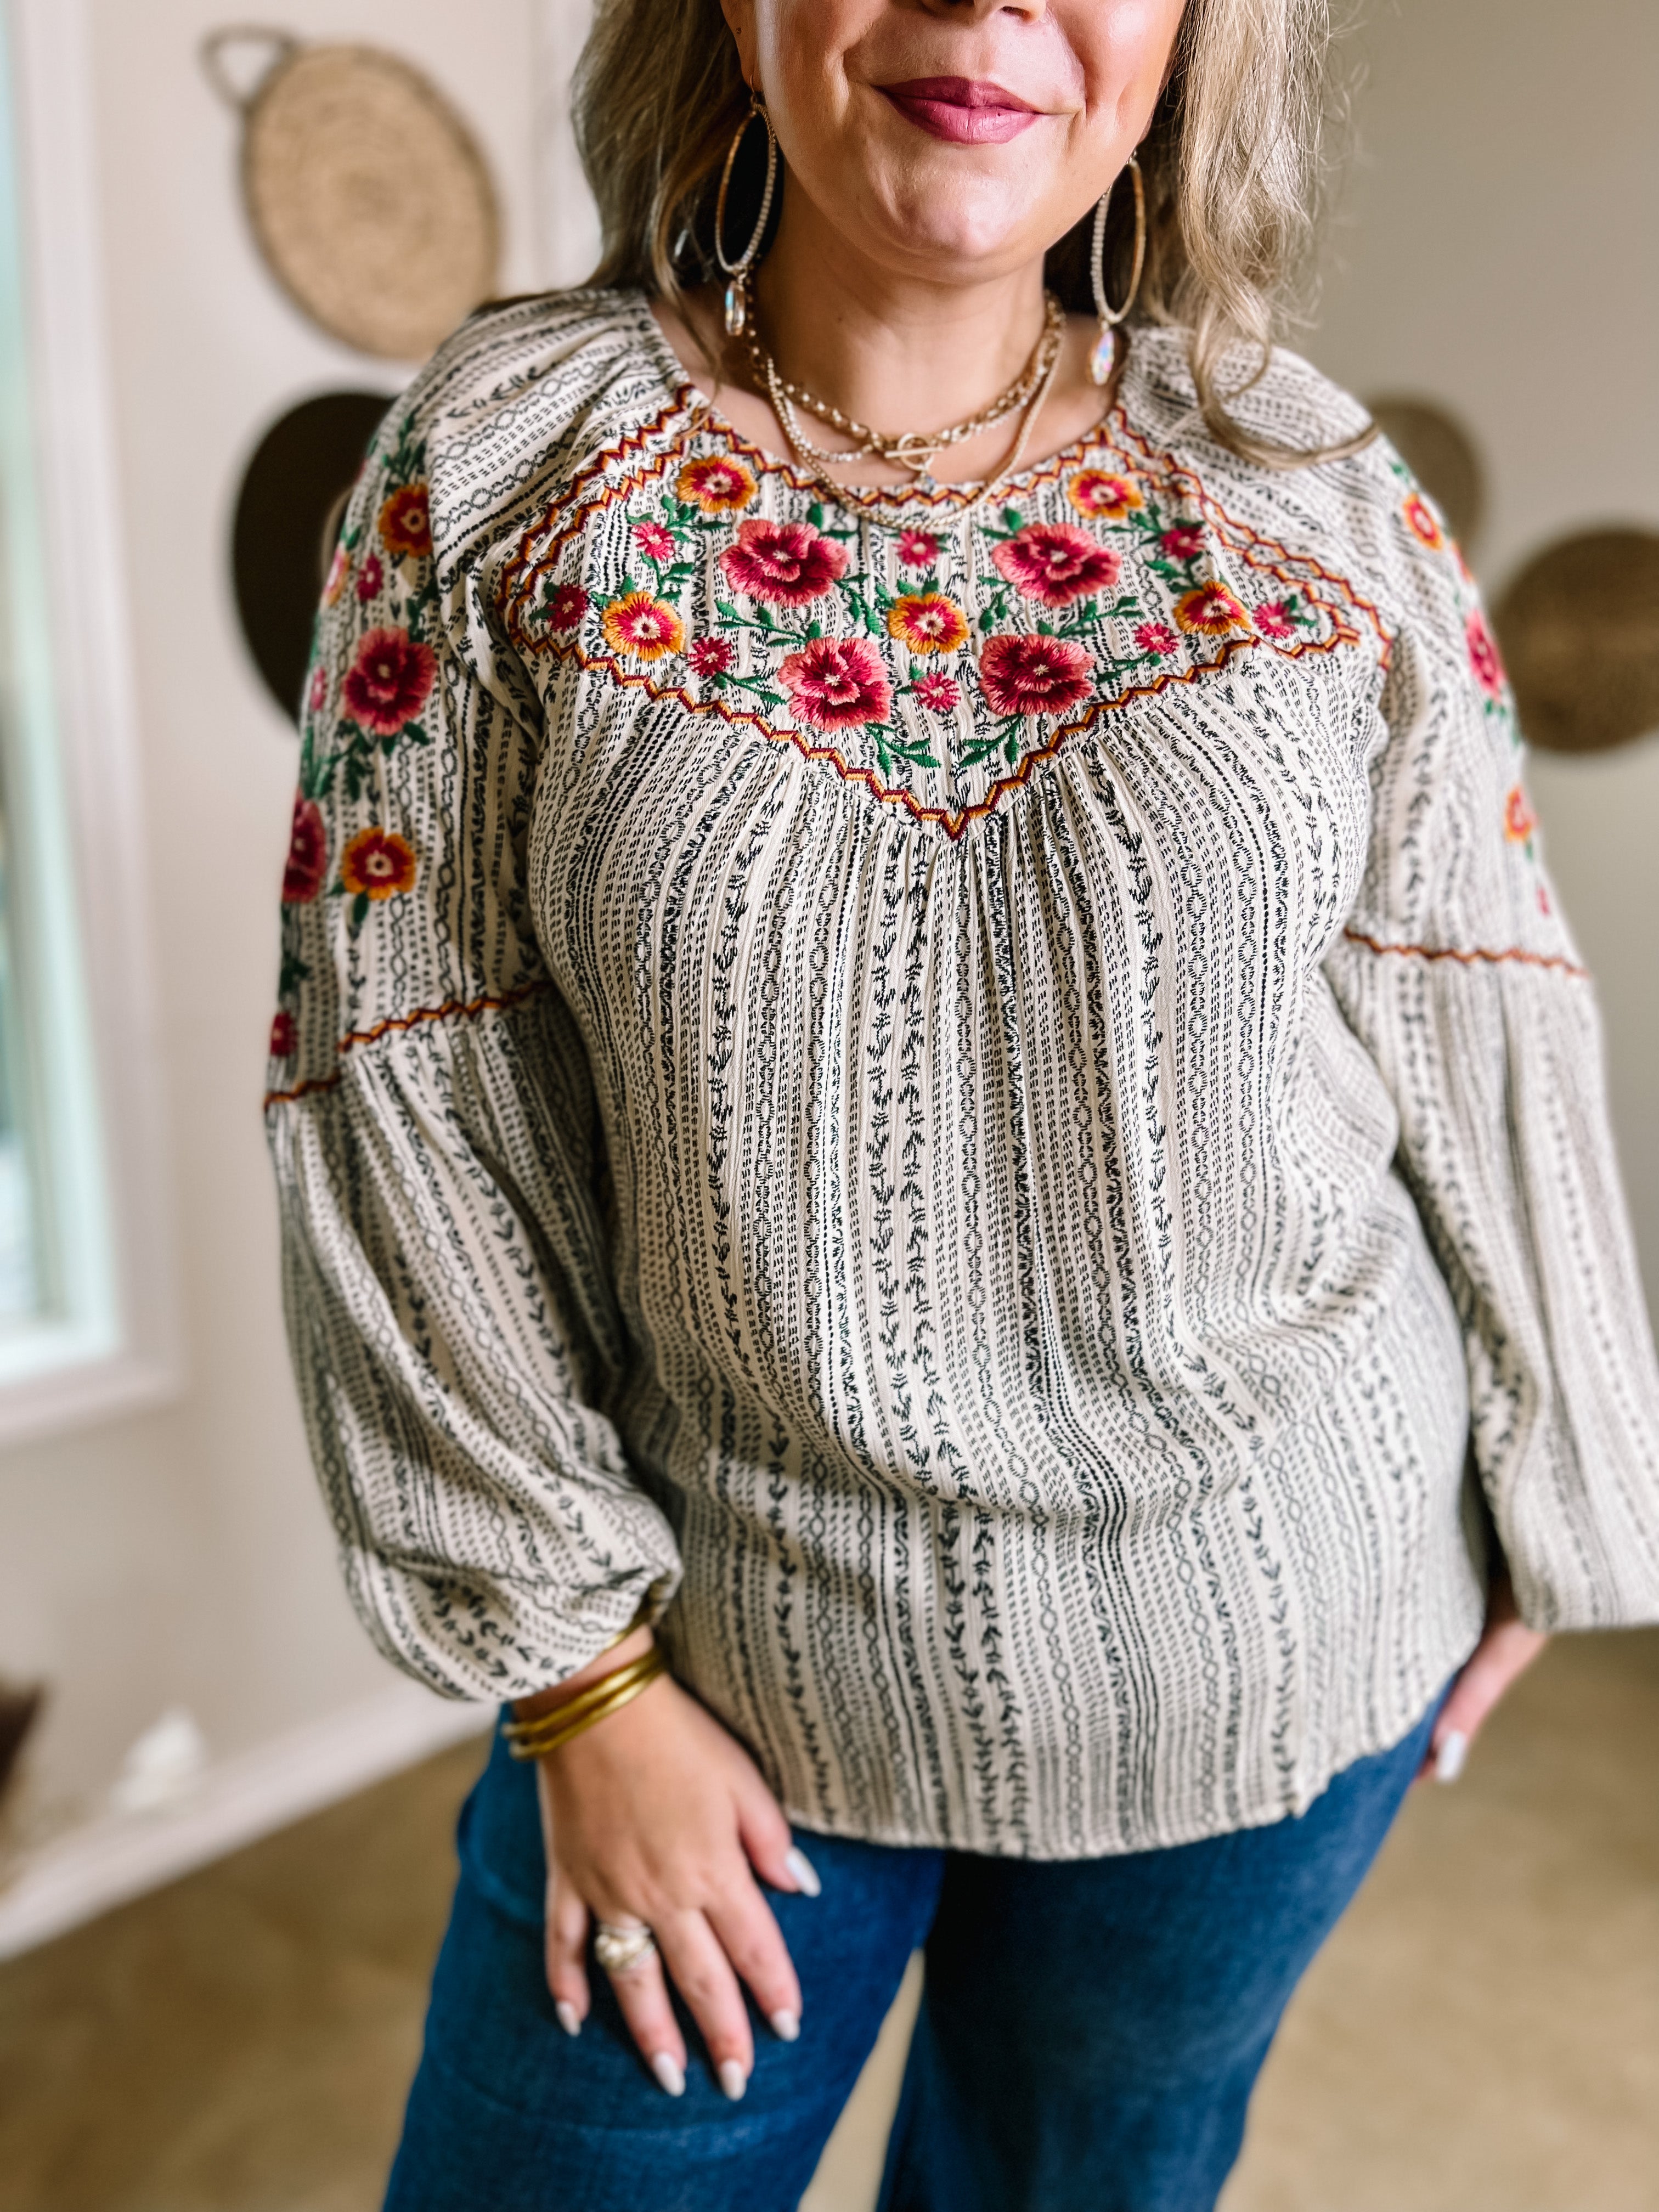 Savanna Jane | Looking For Peace Long Sleeve Tribal Print Floral Embroidered Top in Ivory - Giddy Up Glamour Boutique